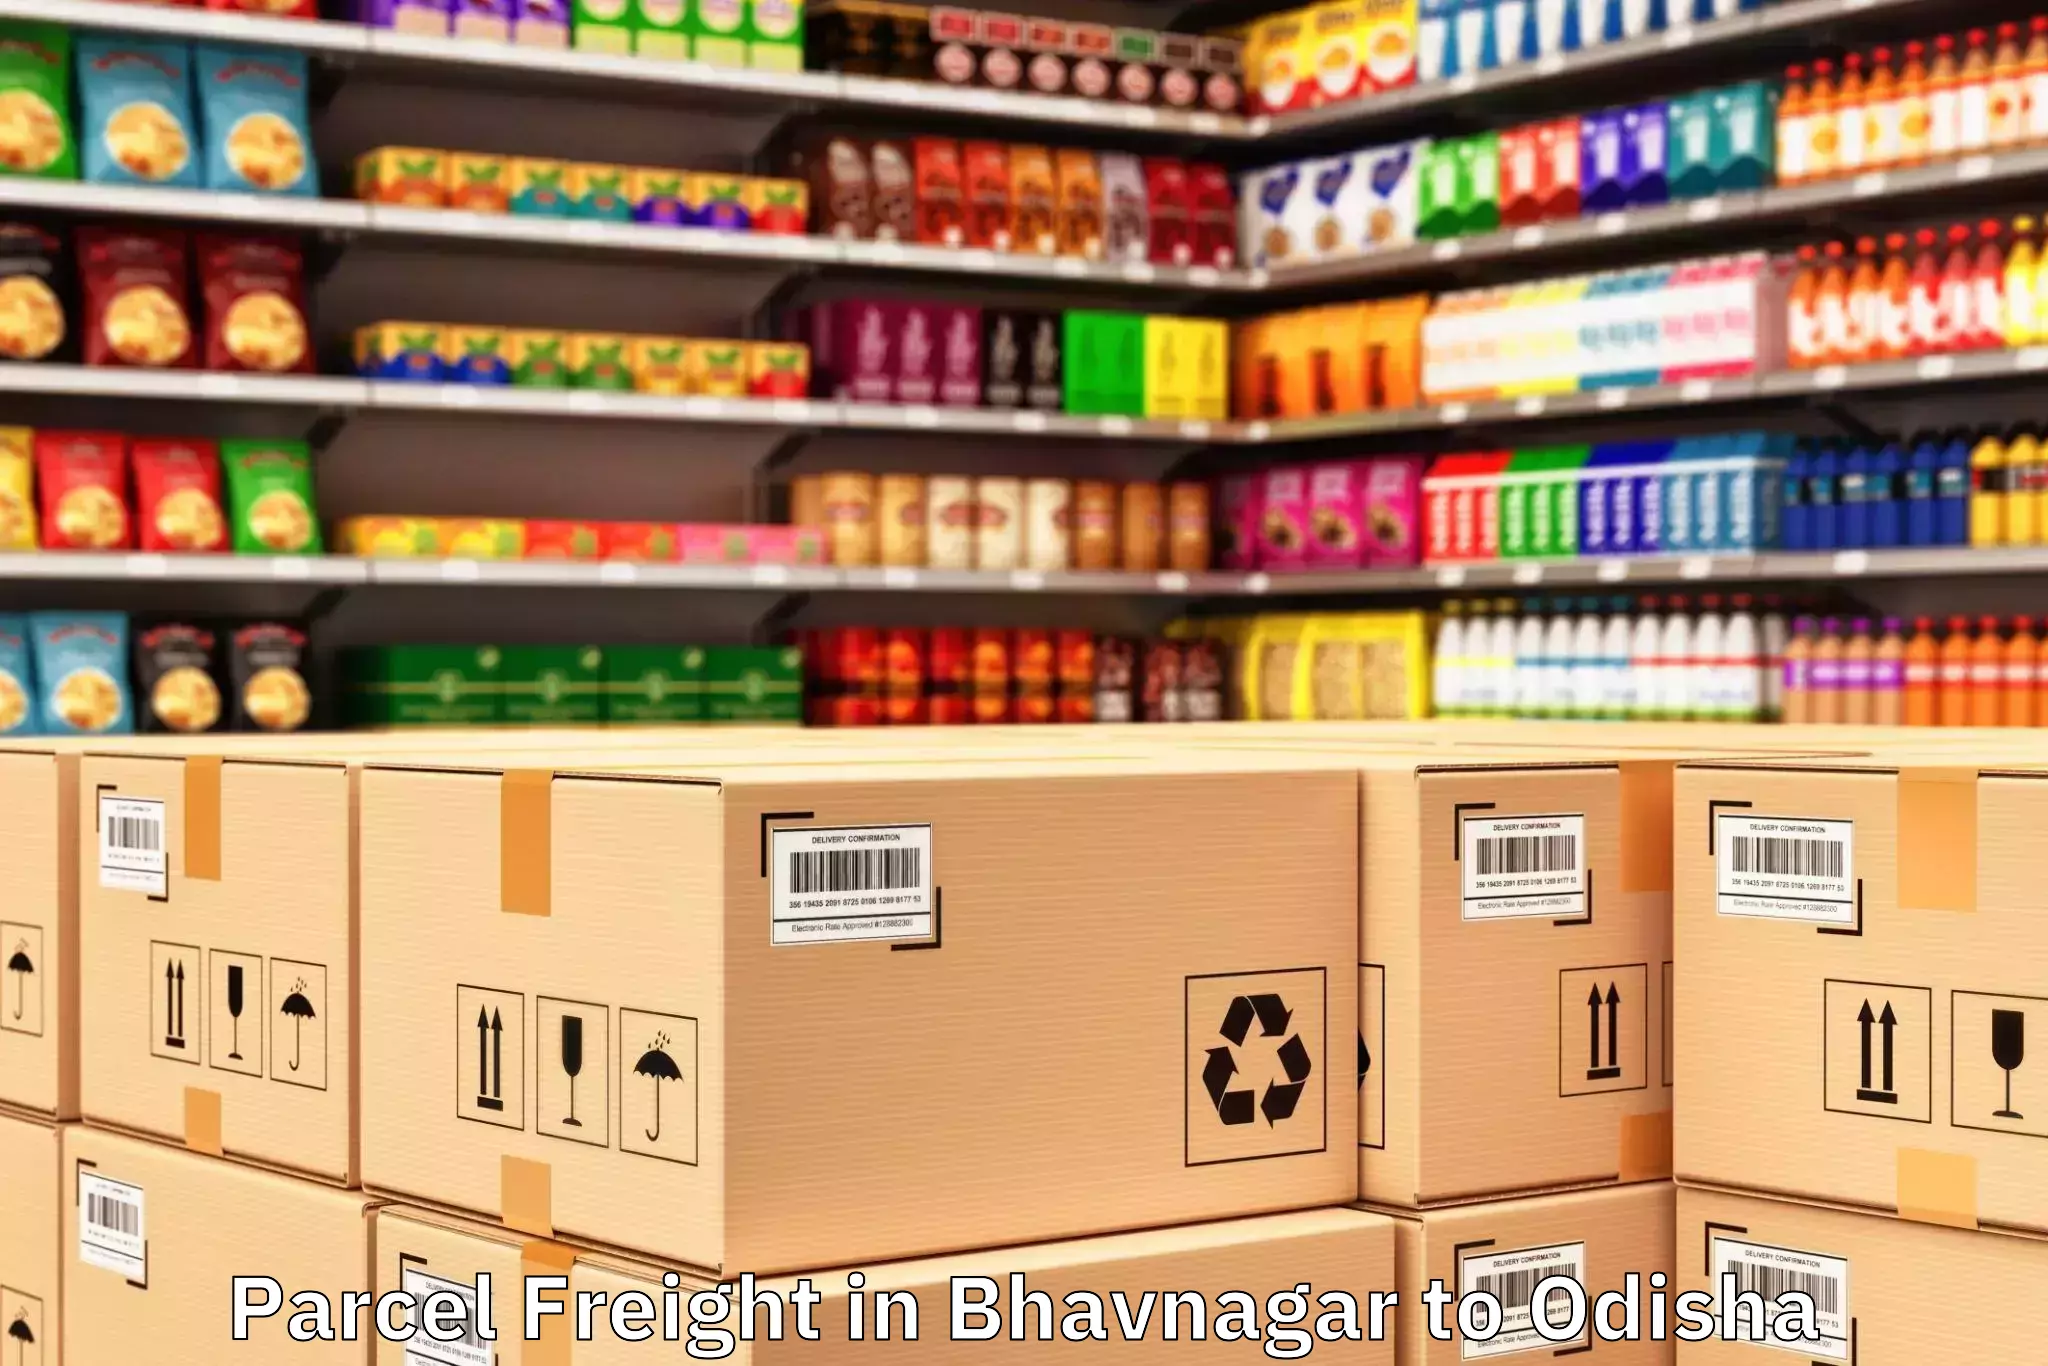 Top Bhavnagar to Bhawani Mall Parcel Freight Available